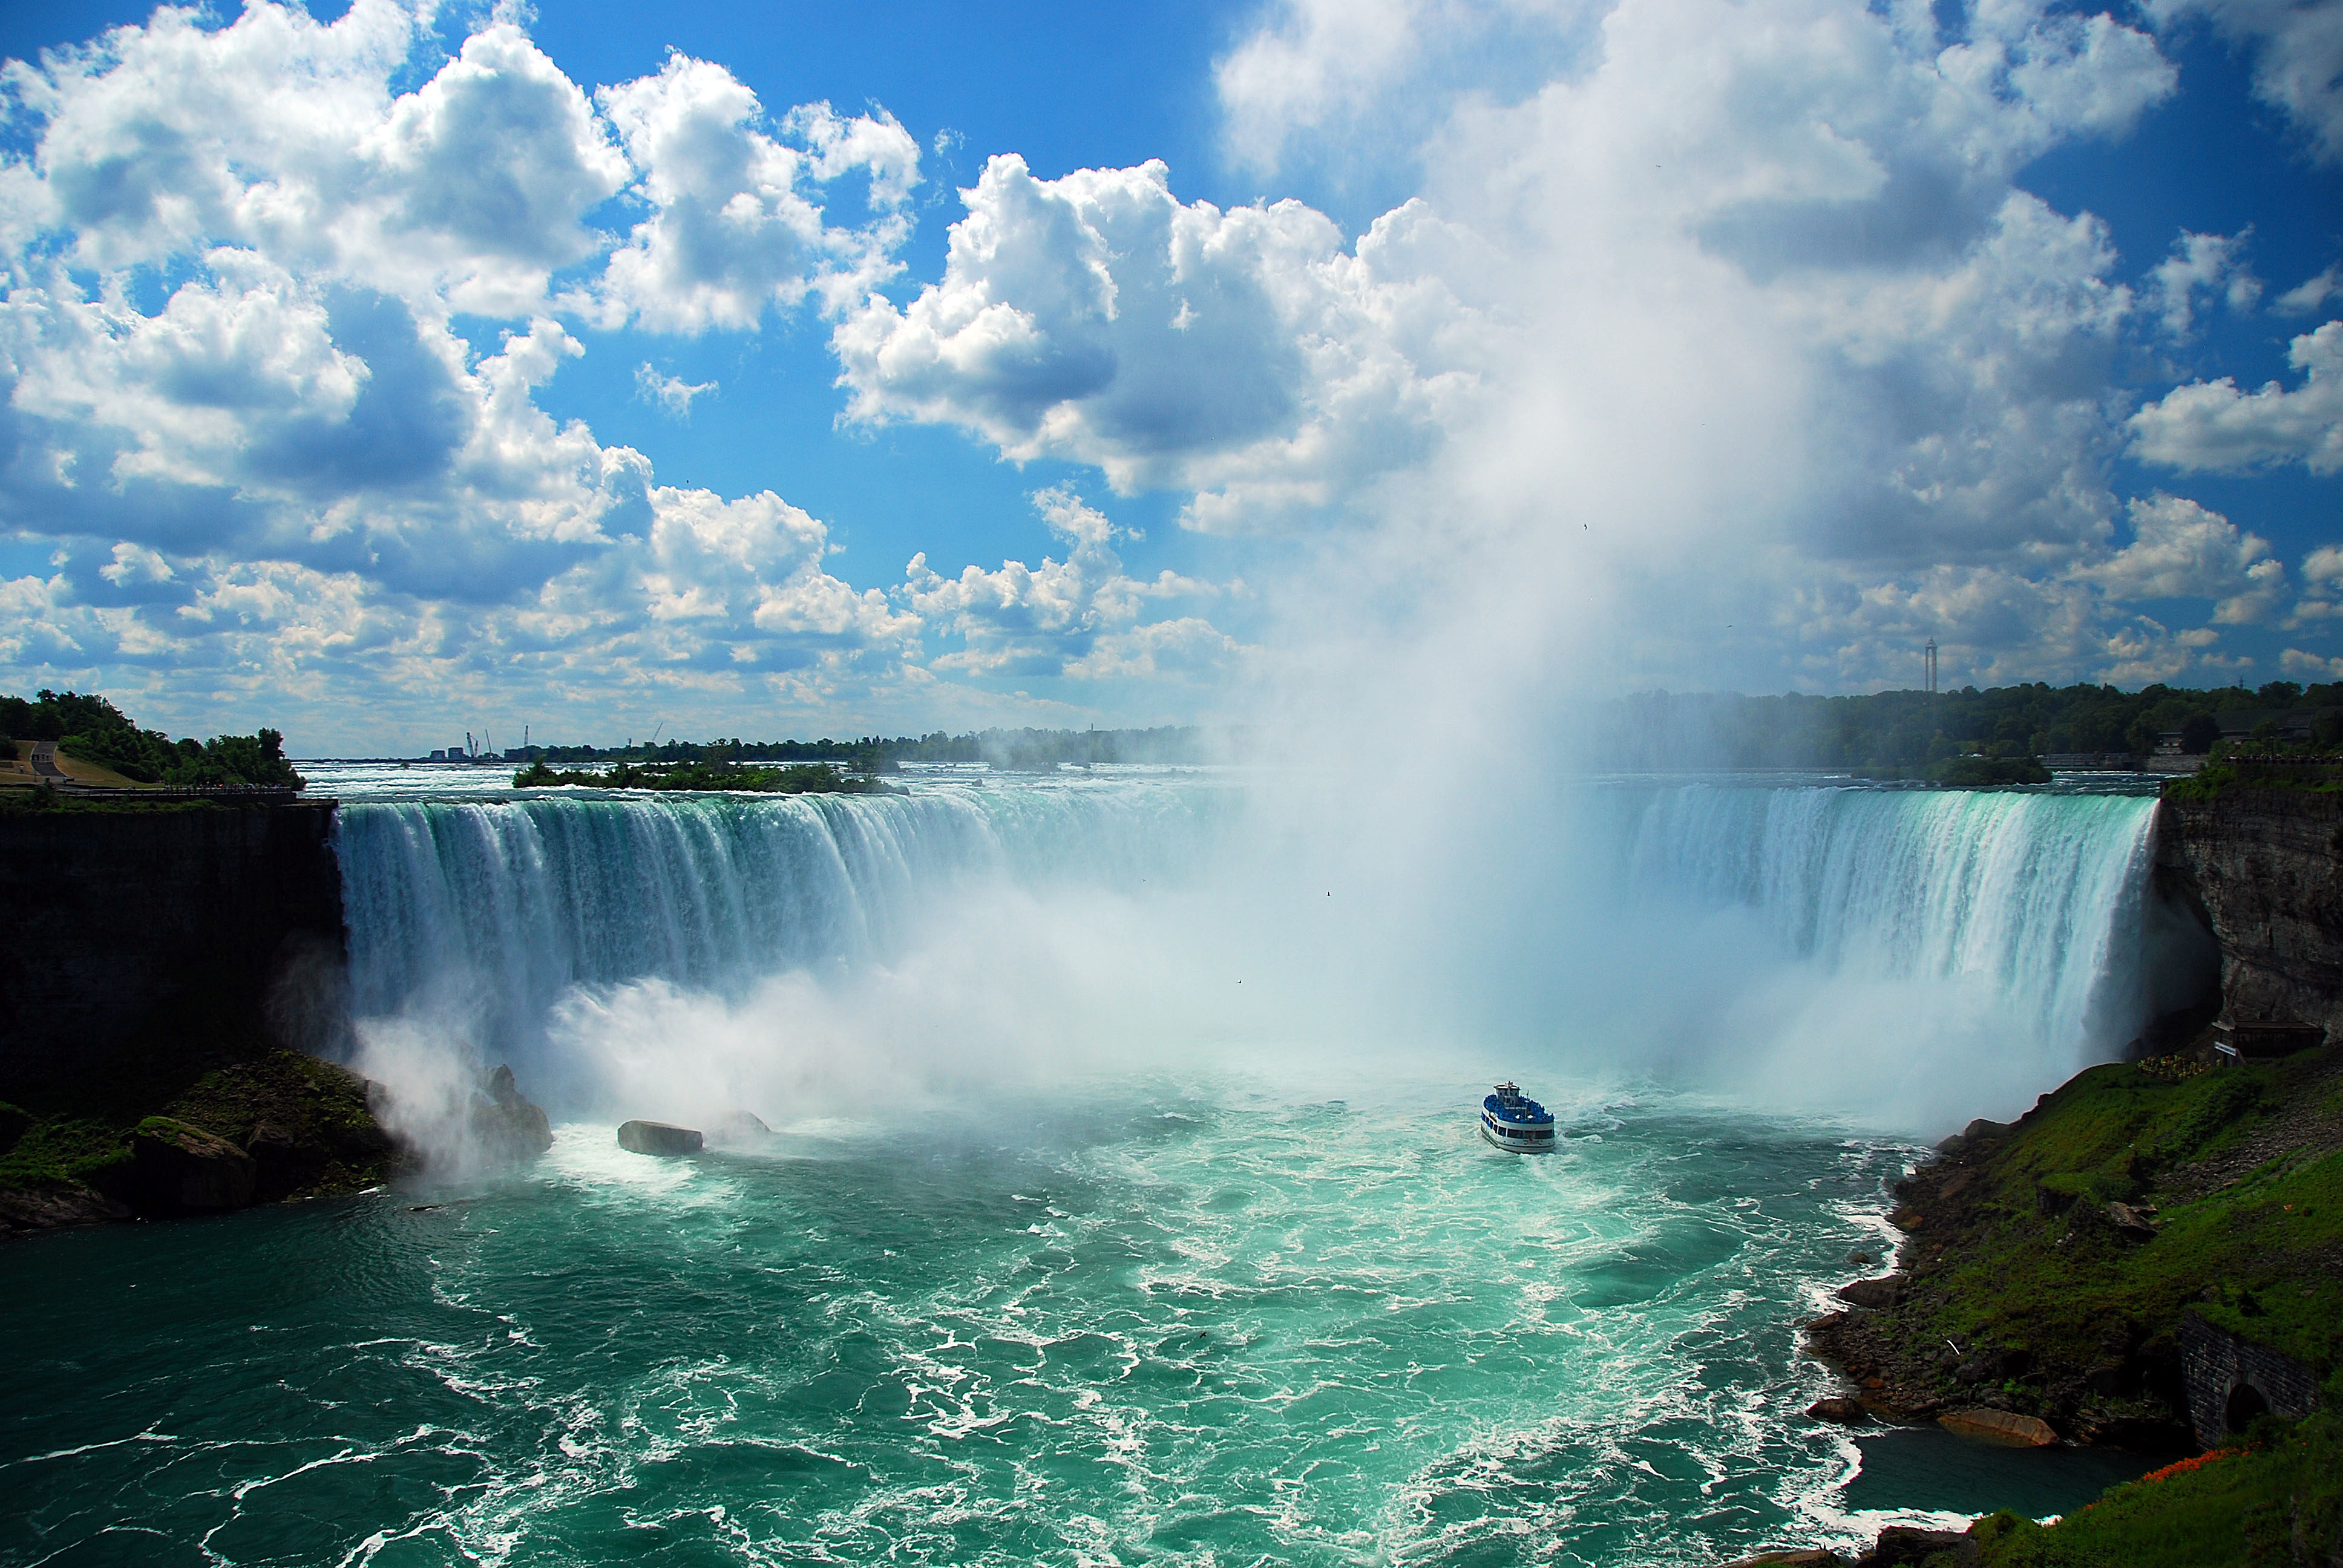 Niagara Falls, One of The Largest Waterfall in The world